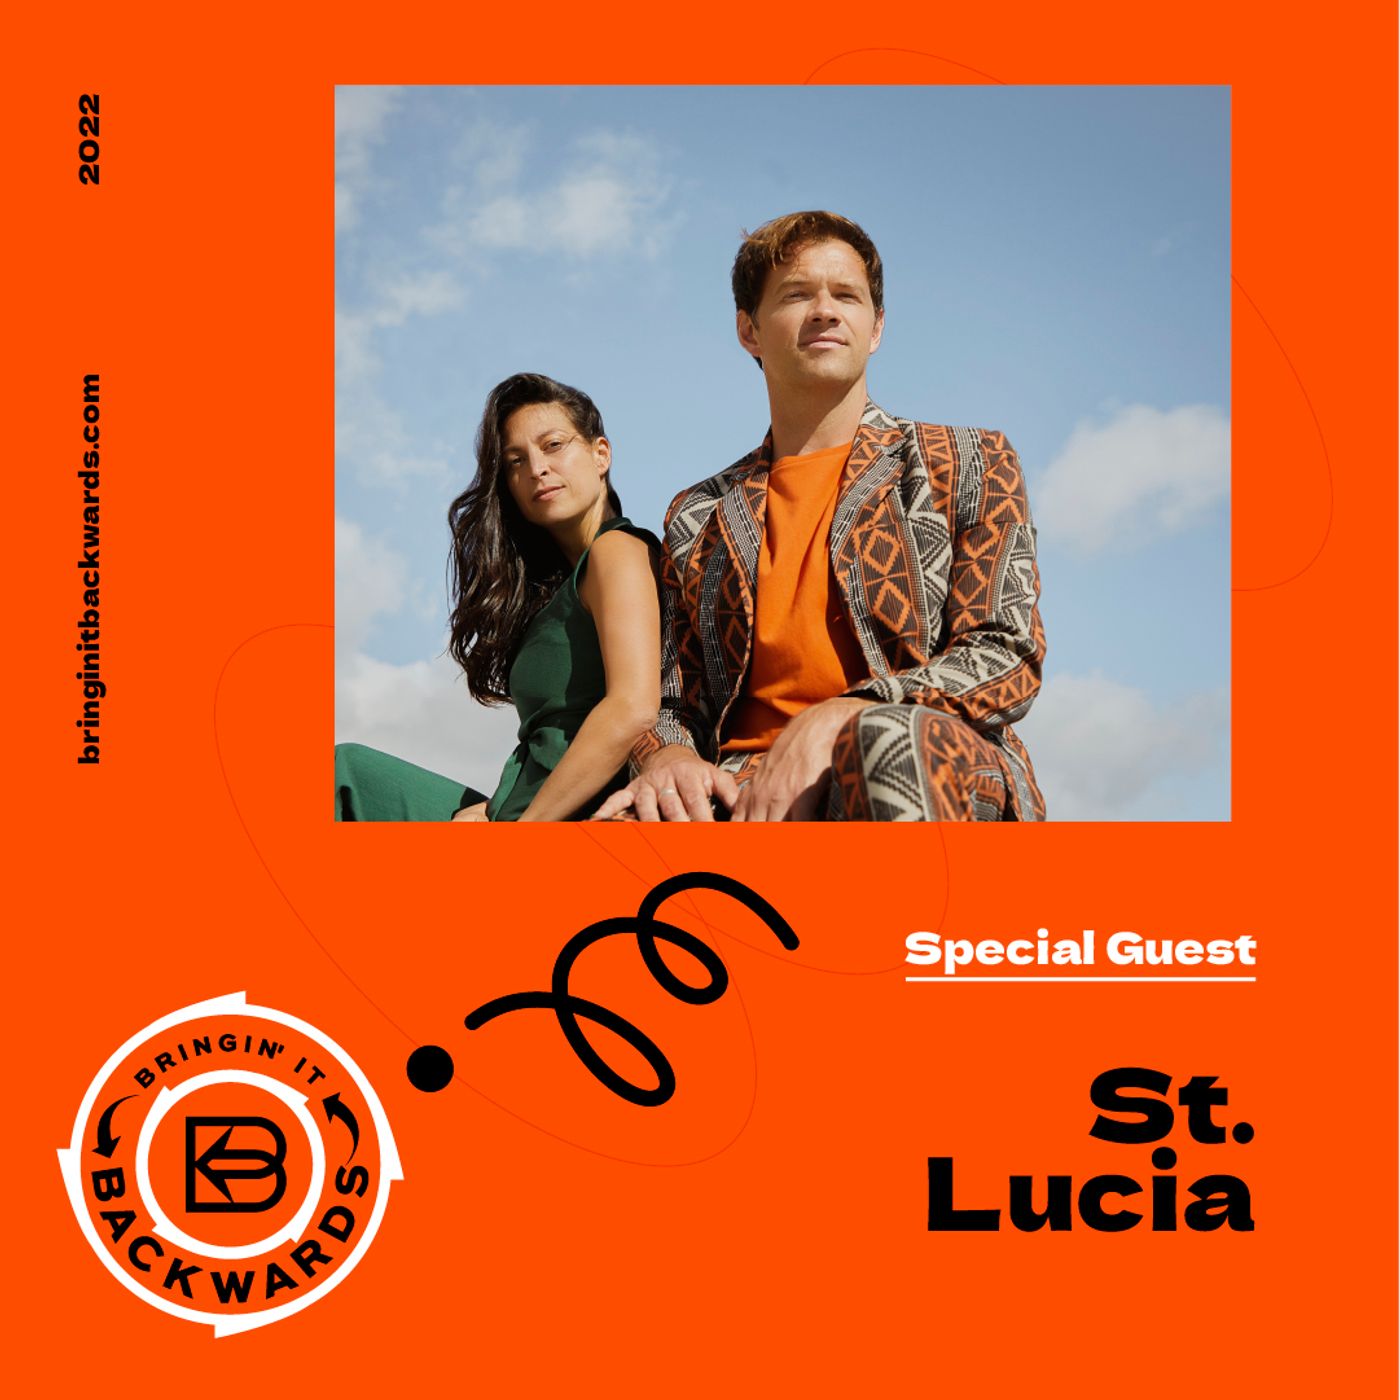 Interview with St. Lucia Image